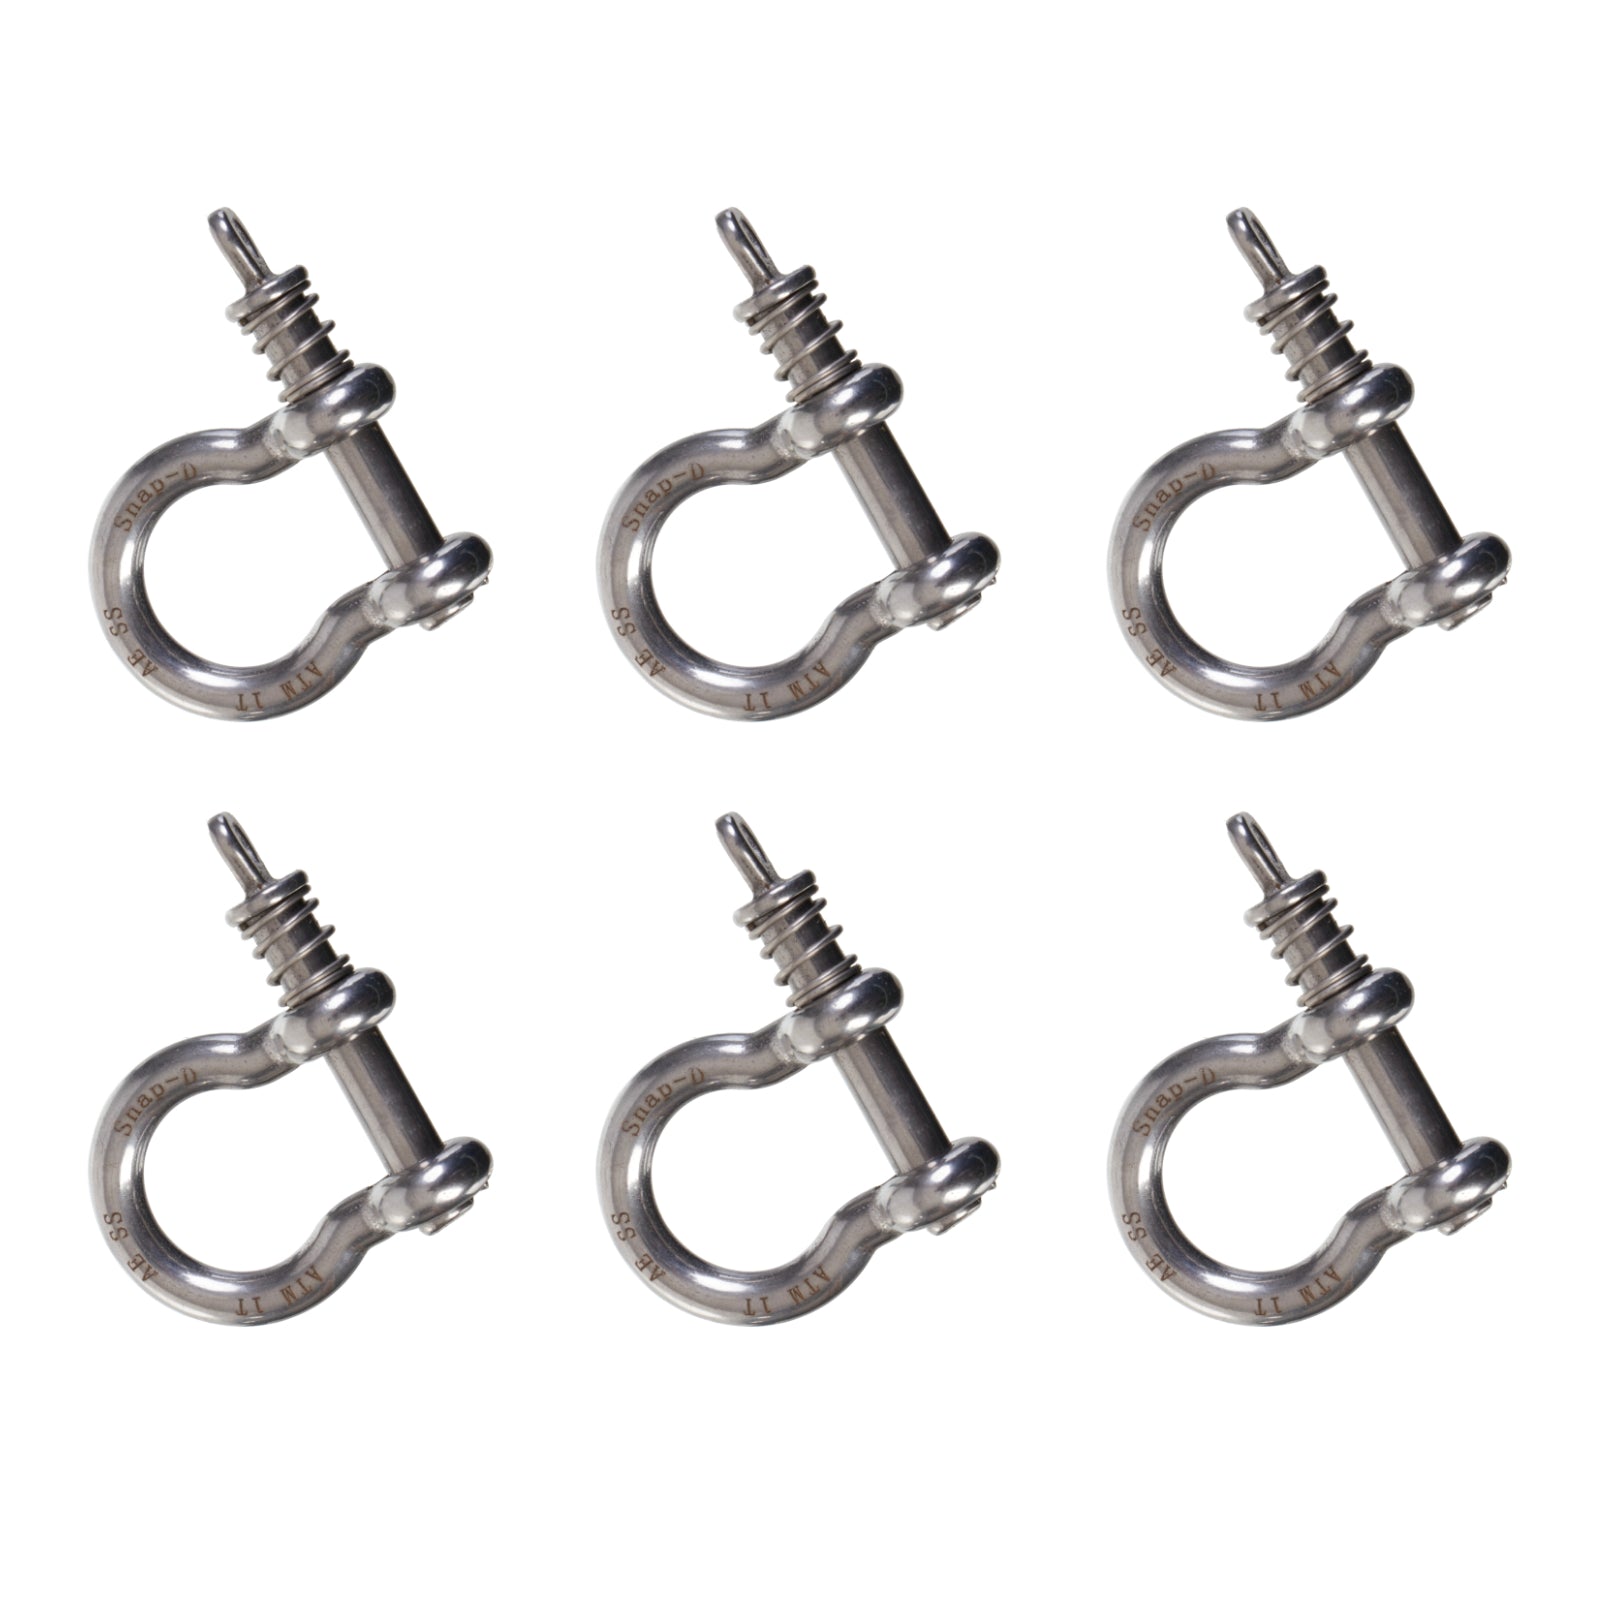 New SNAP-D 8Mm Bow Shackle - 6 Pack Special SD8BSS6PK